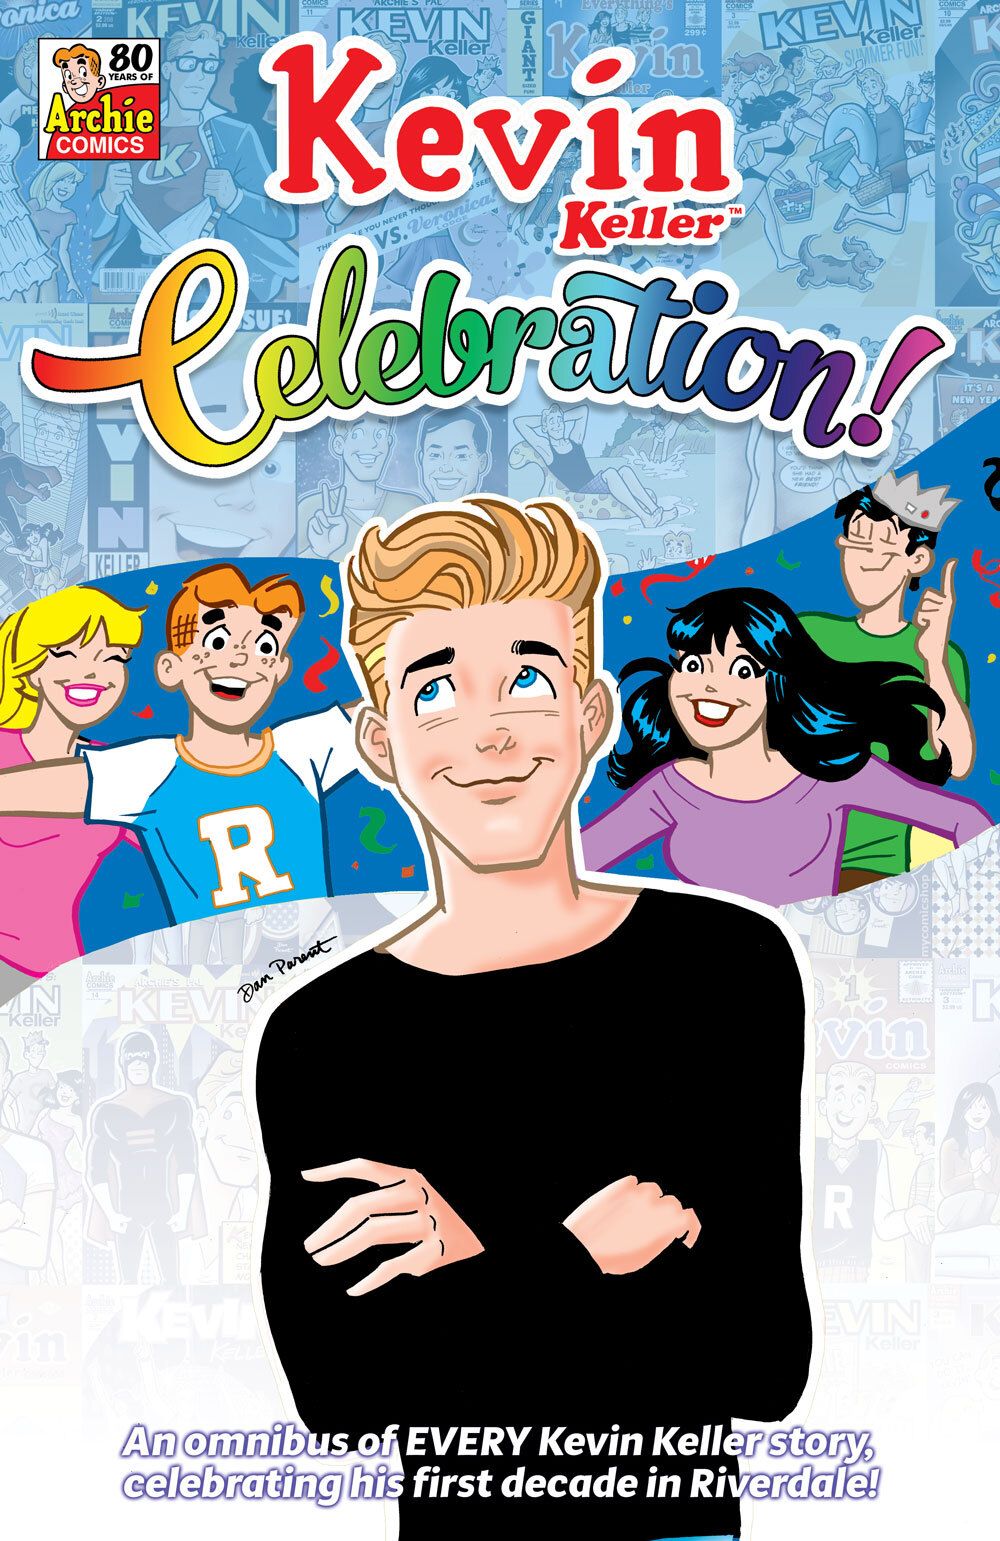 The cover to Archie Comics' Kevin Keller CELEBRATION!